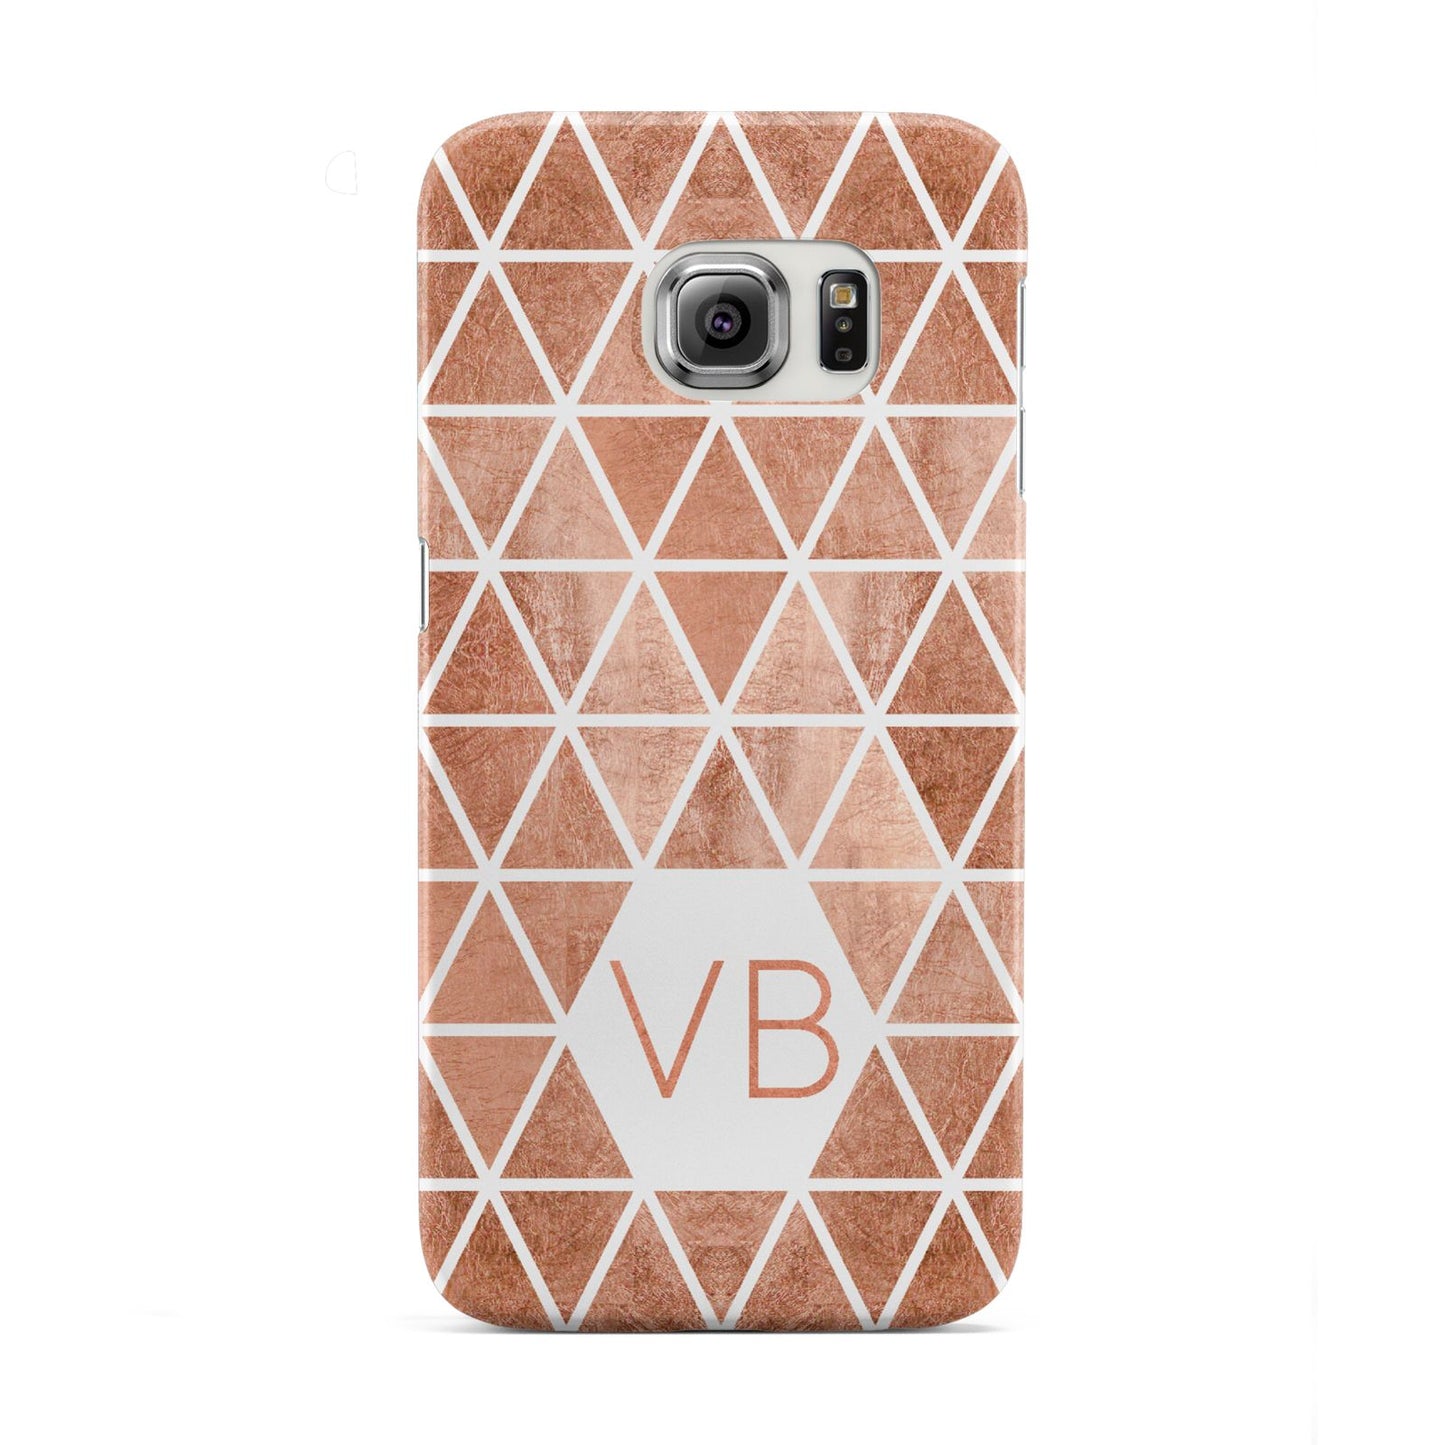 Personalised Copper Initials Samsung Galaxy S6 Edge Case